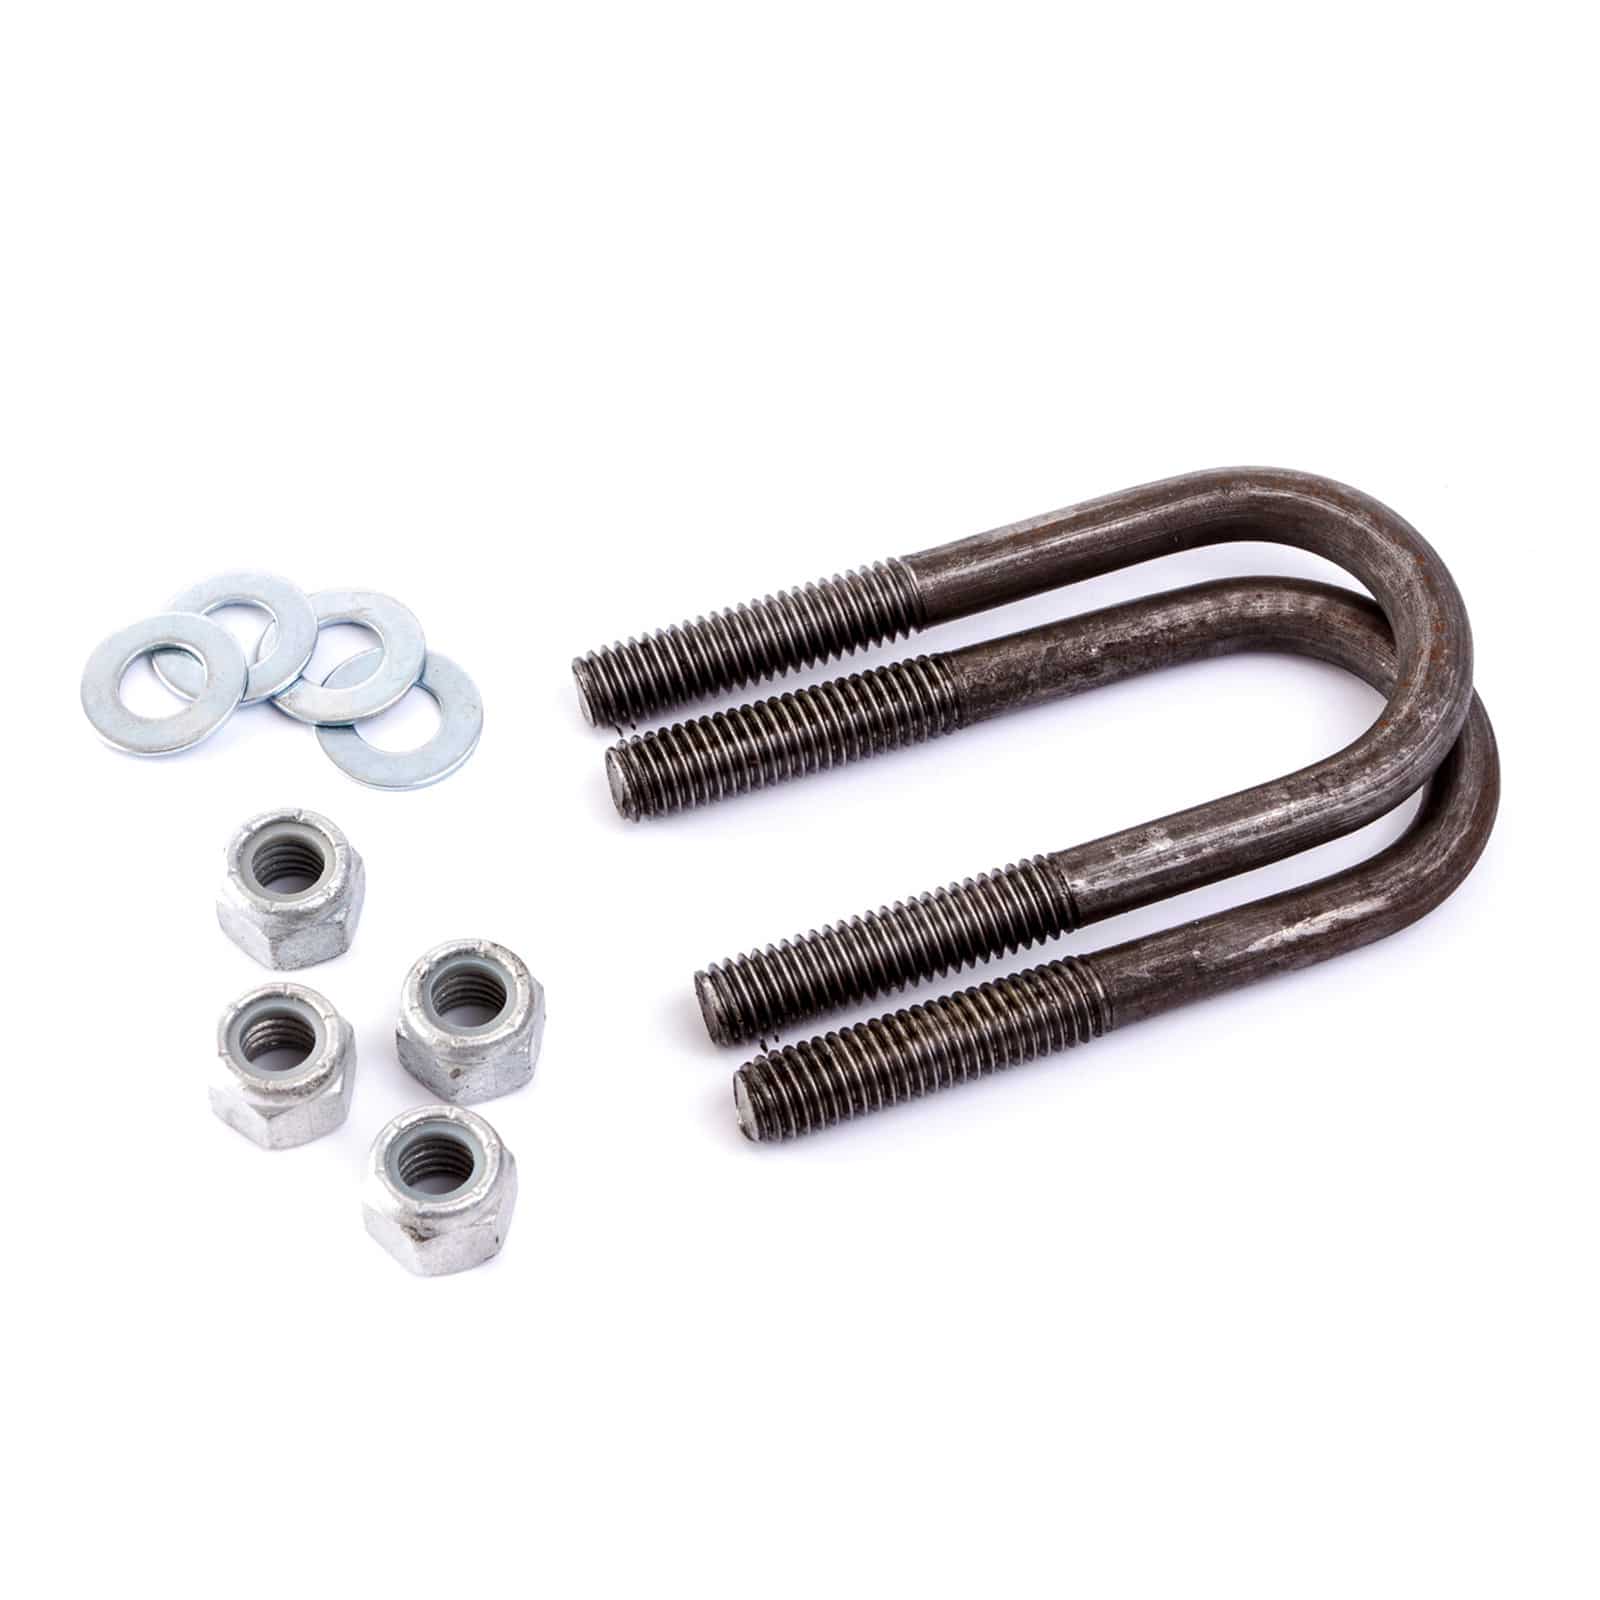 U Bolt Kit, includes 2 x U-Bolts, 4 x Nyloc Nuts, 4 x Washers to suit 40mm square axle